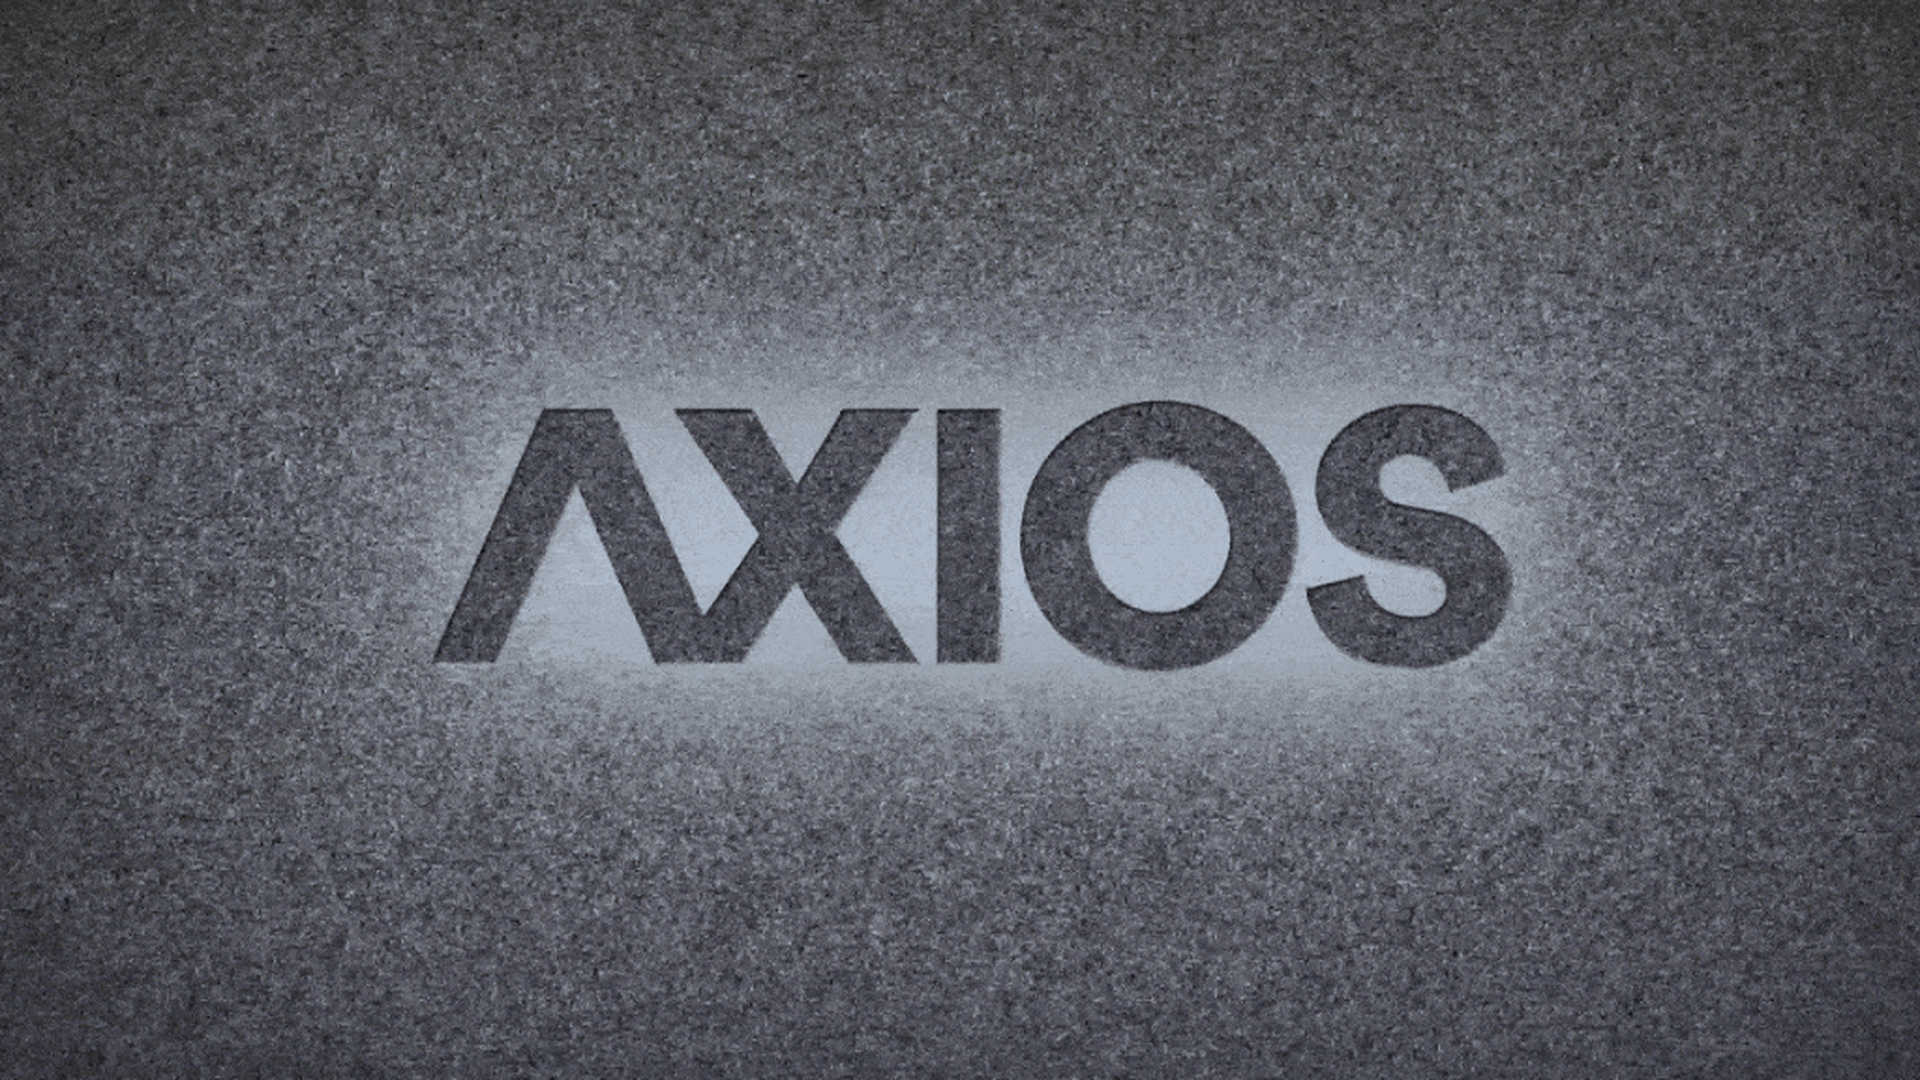 Axios to debut on HBO ahead of 2018 midterm elections - Axios